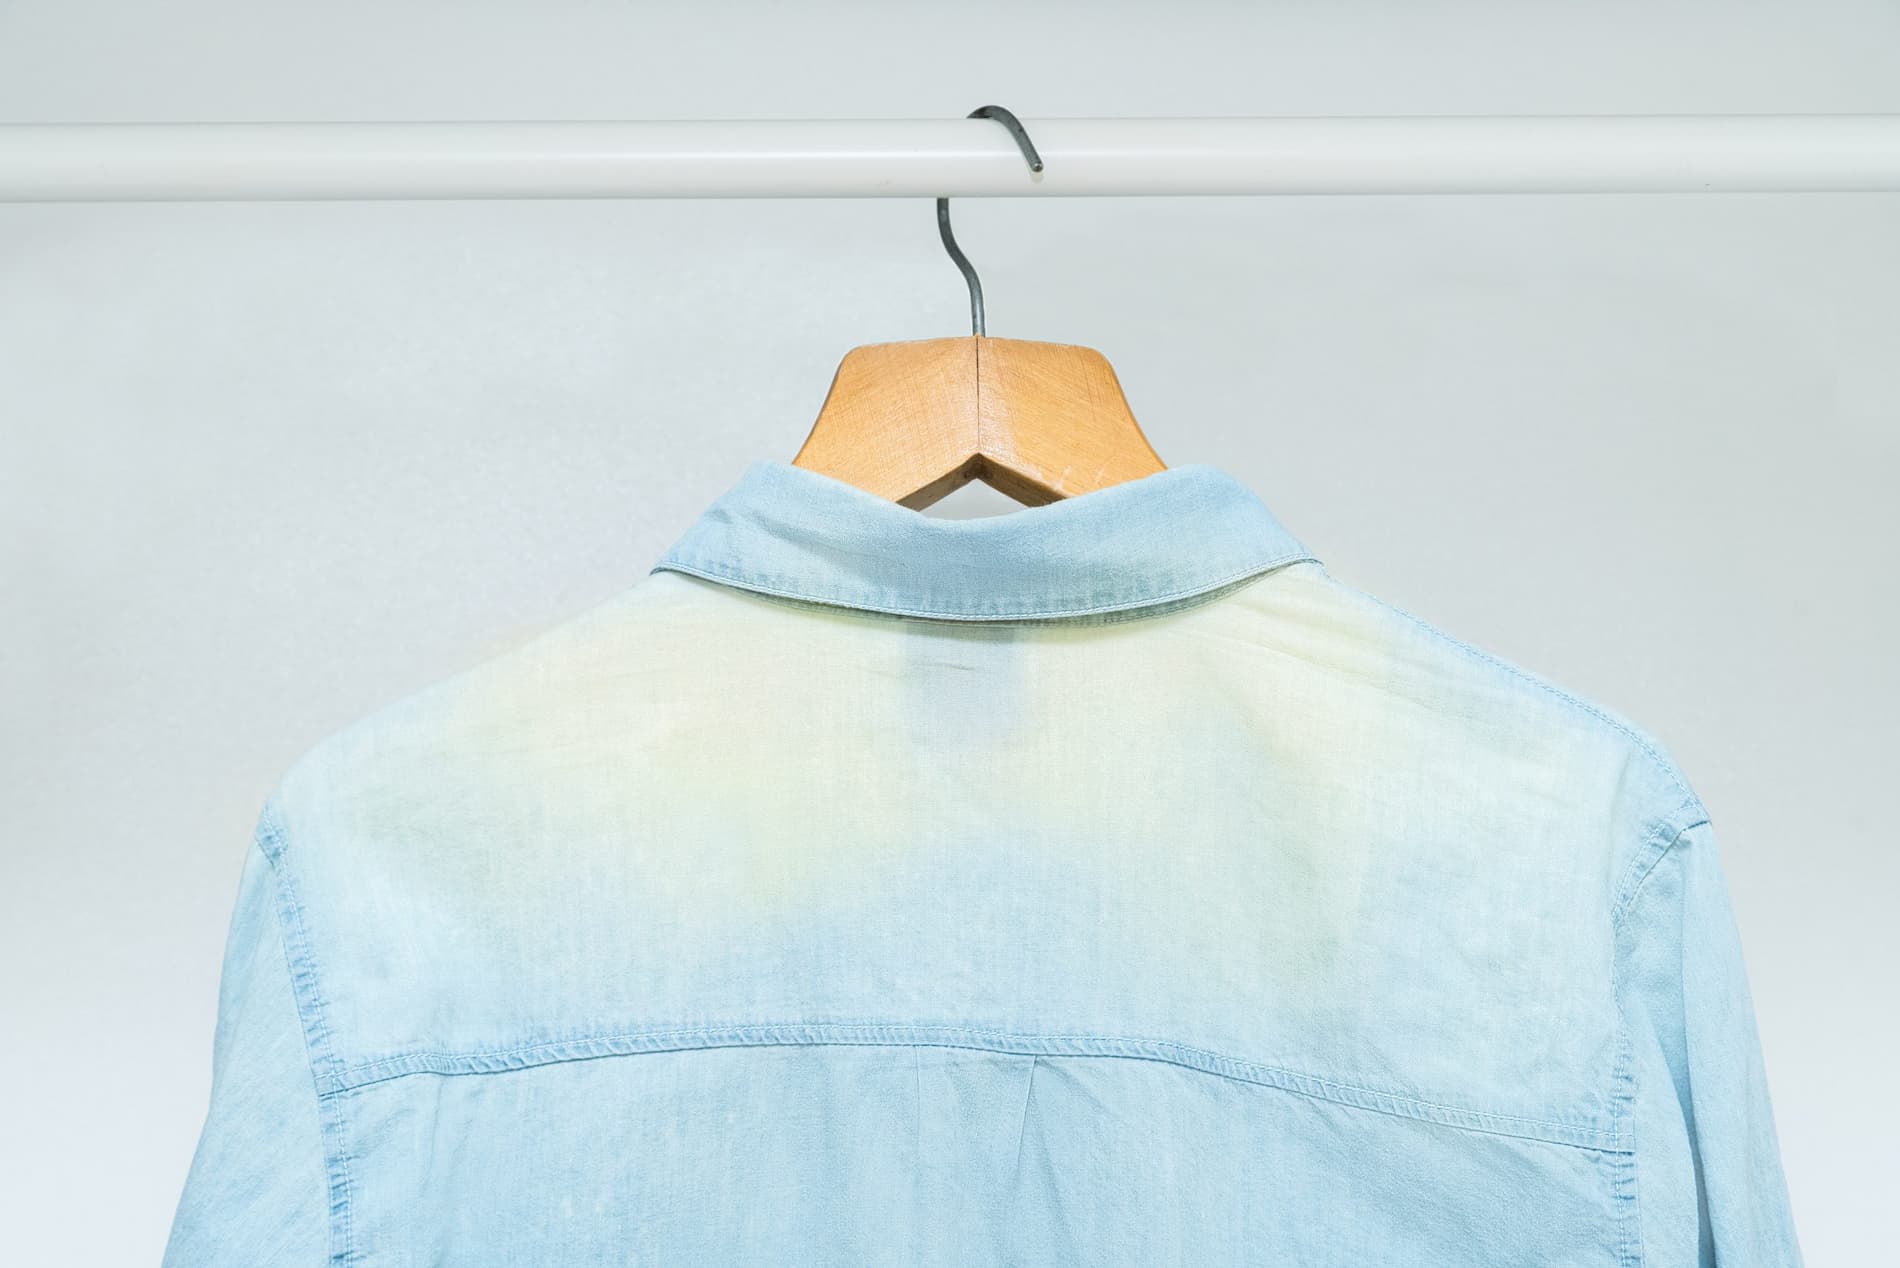 https://mybutlerservice.com.au/wp-content/uploads/2021/06/worn-out-bleached-out-old-classic-business-shirt-hanging-wardrobe.jpg